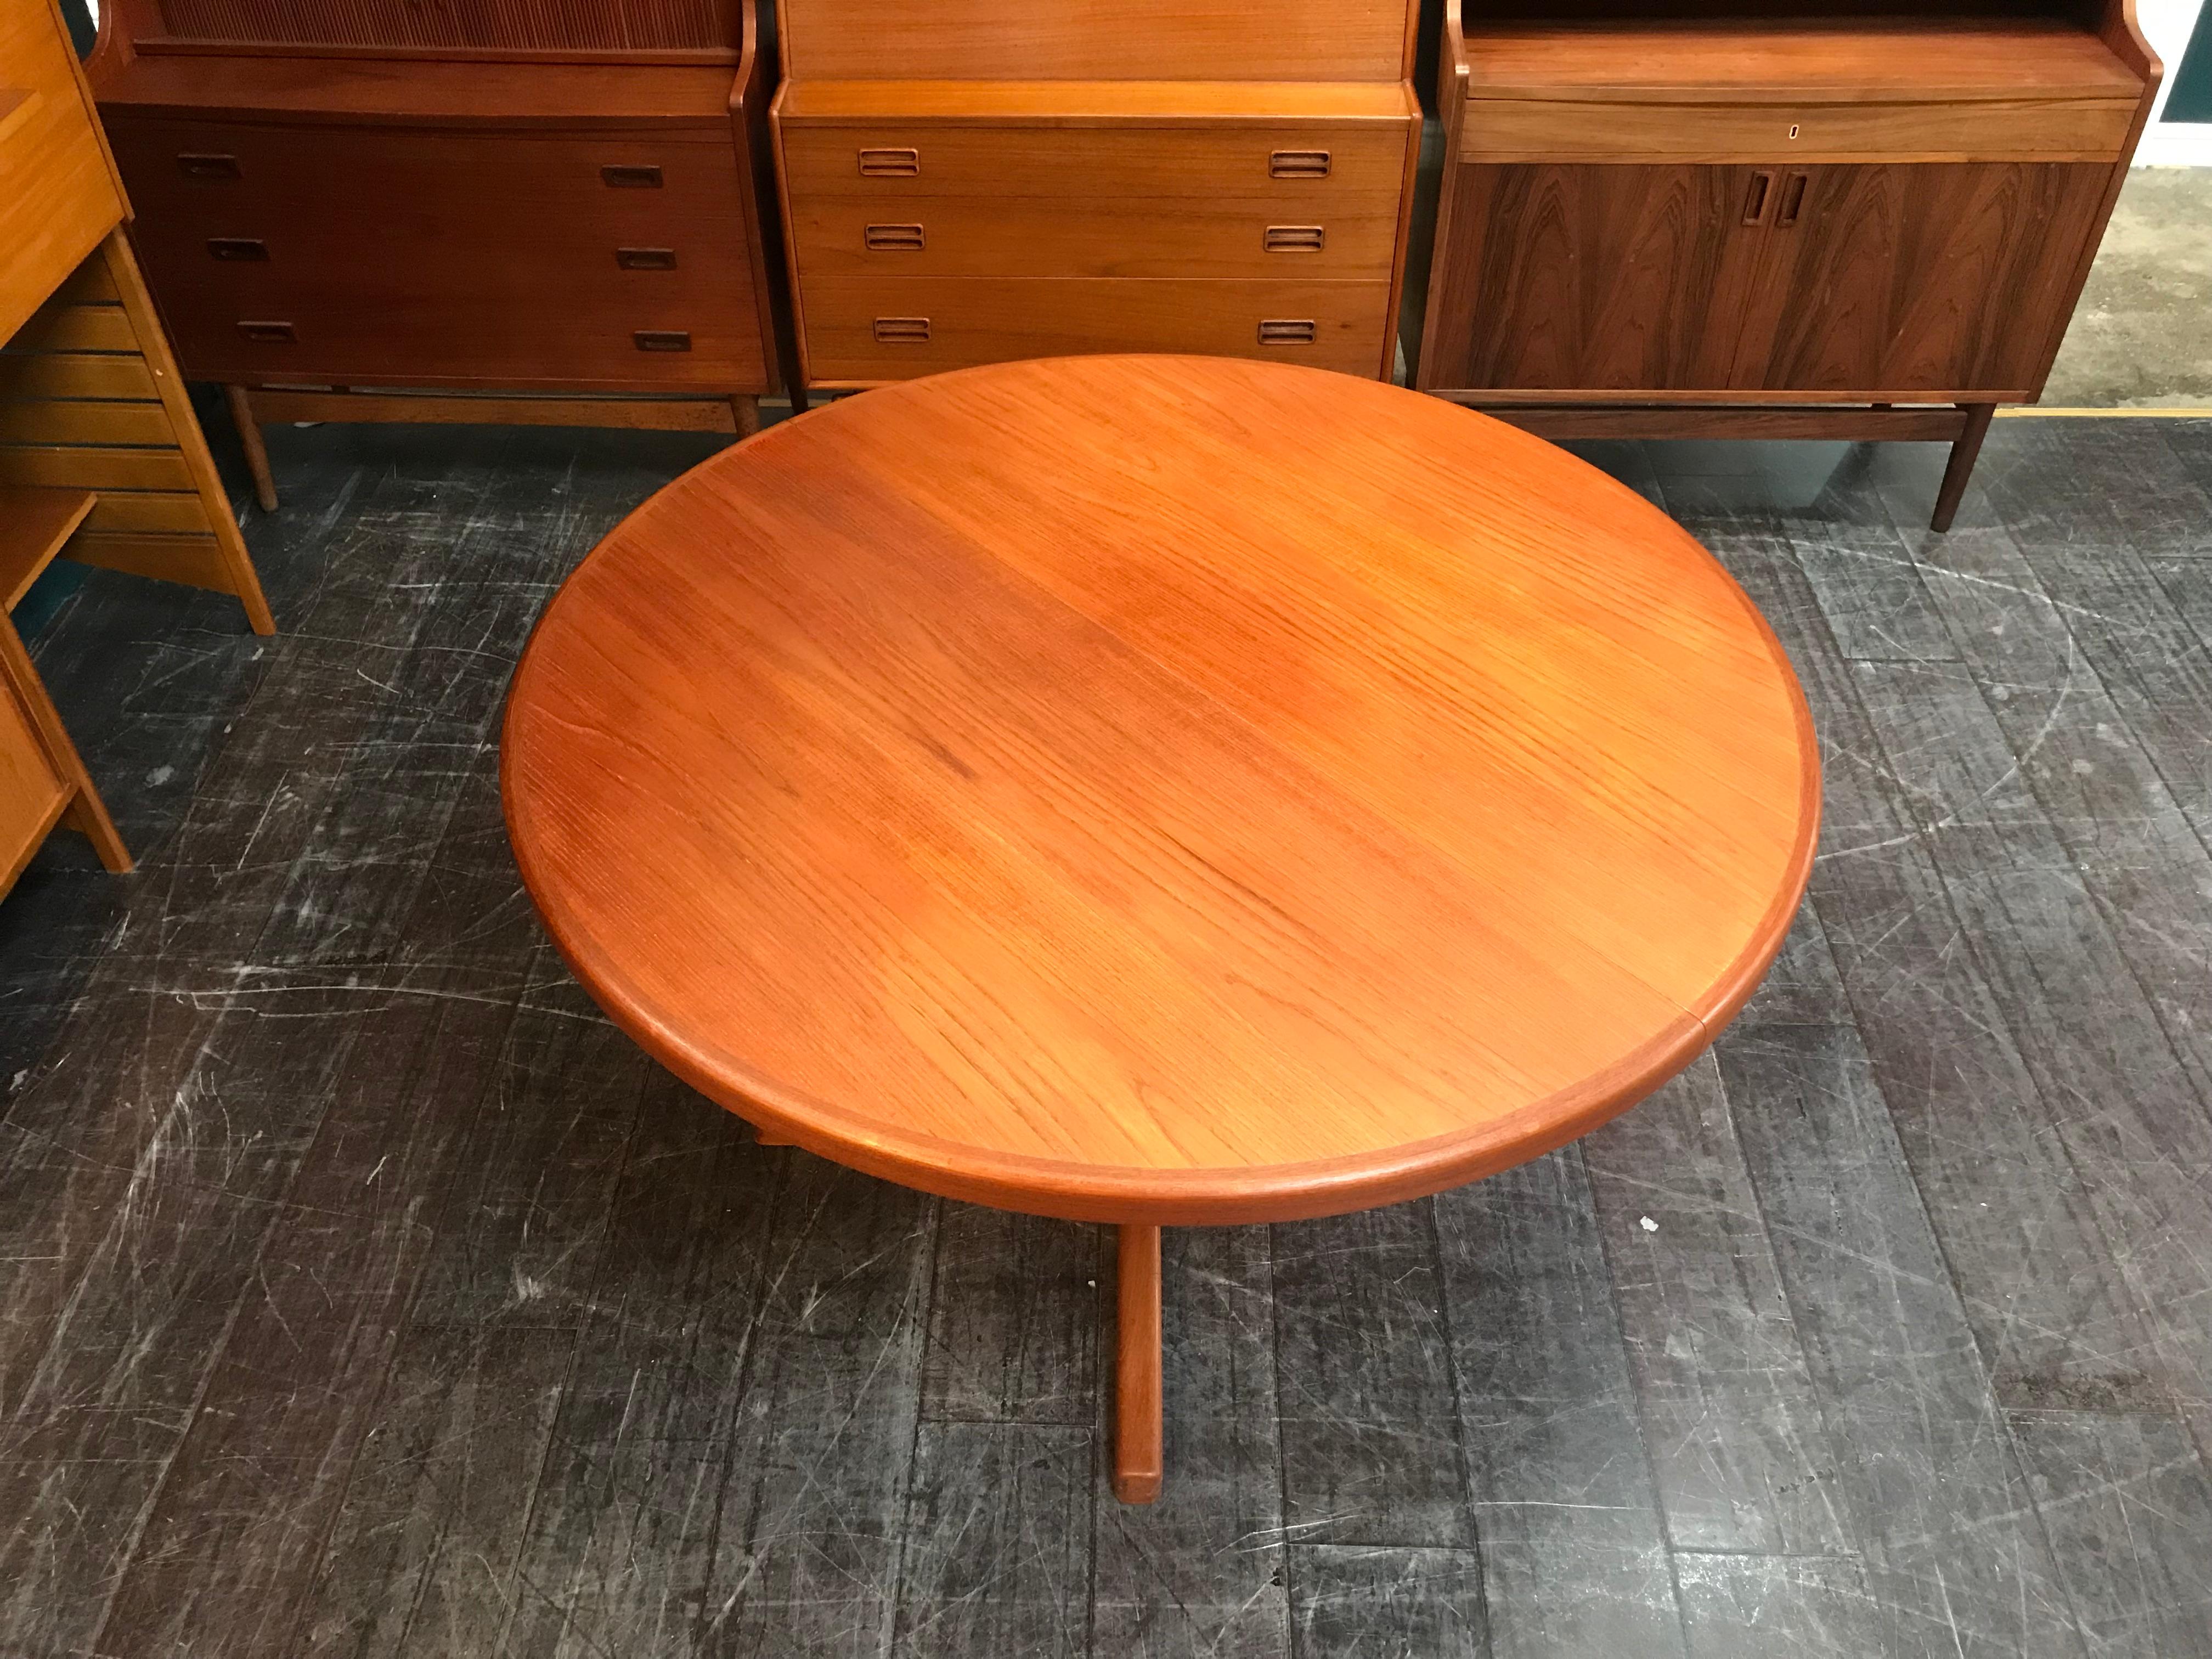 A beautiful extending ‘pedestal’ dining table designed made by the Danish firm Rosengaarden, possibly designed by Erik Buch. This circular table extends to differing lengths by using one or both of the spare leaves that accompany it. A beautiful and